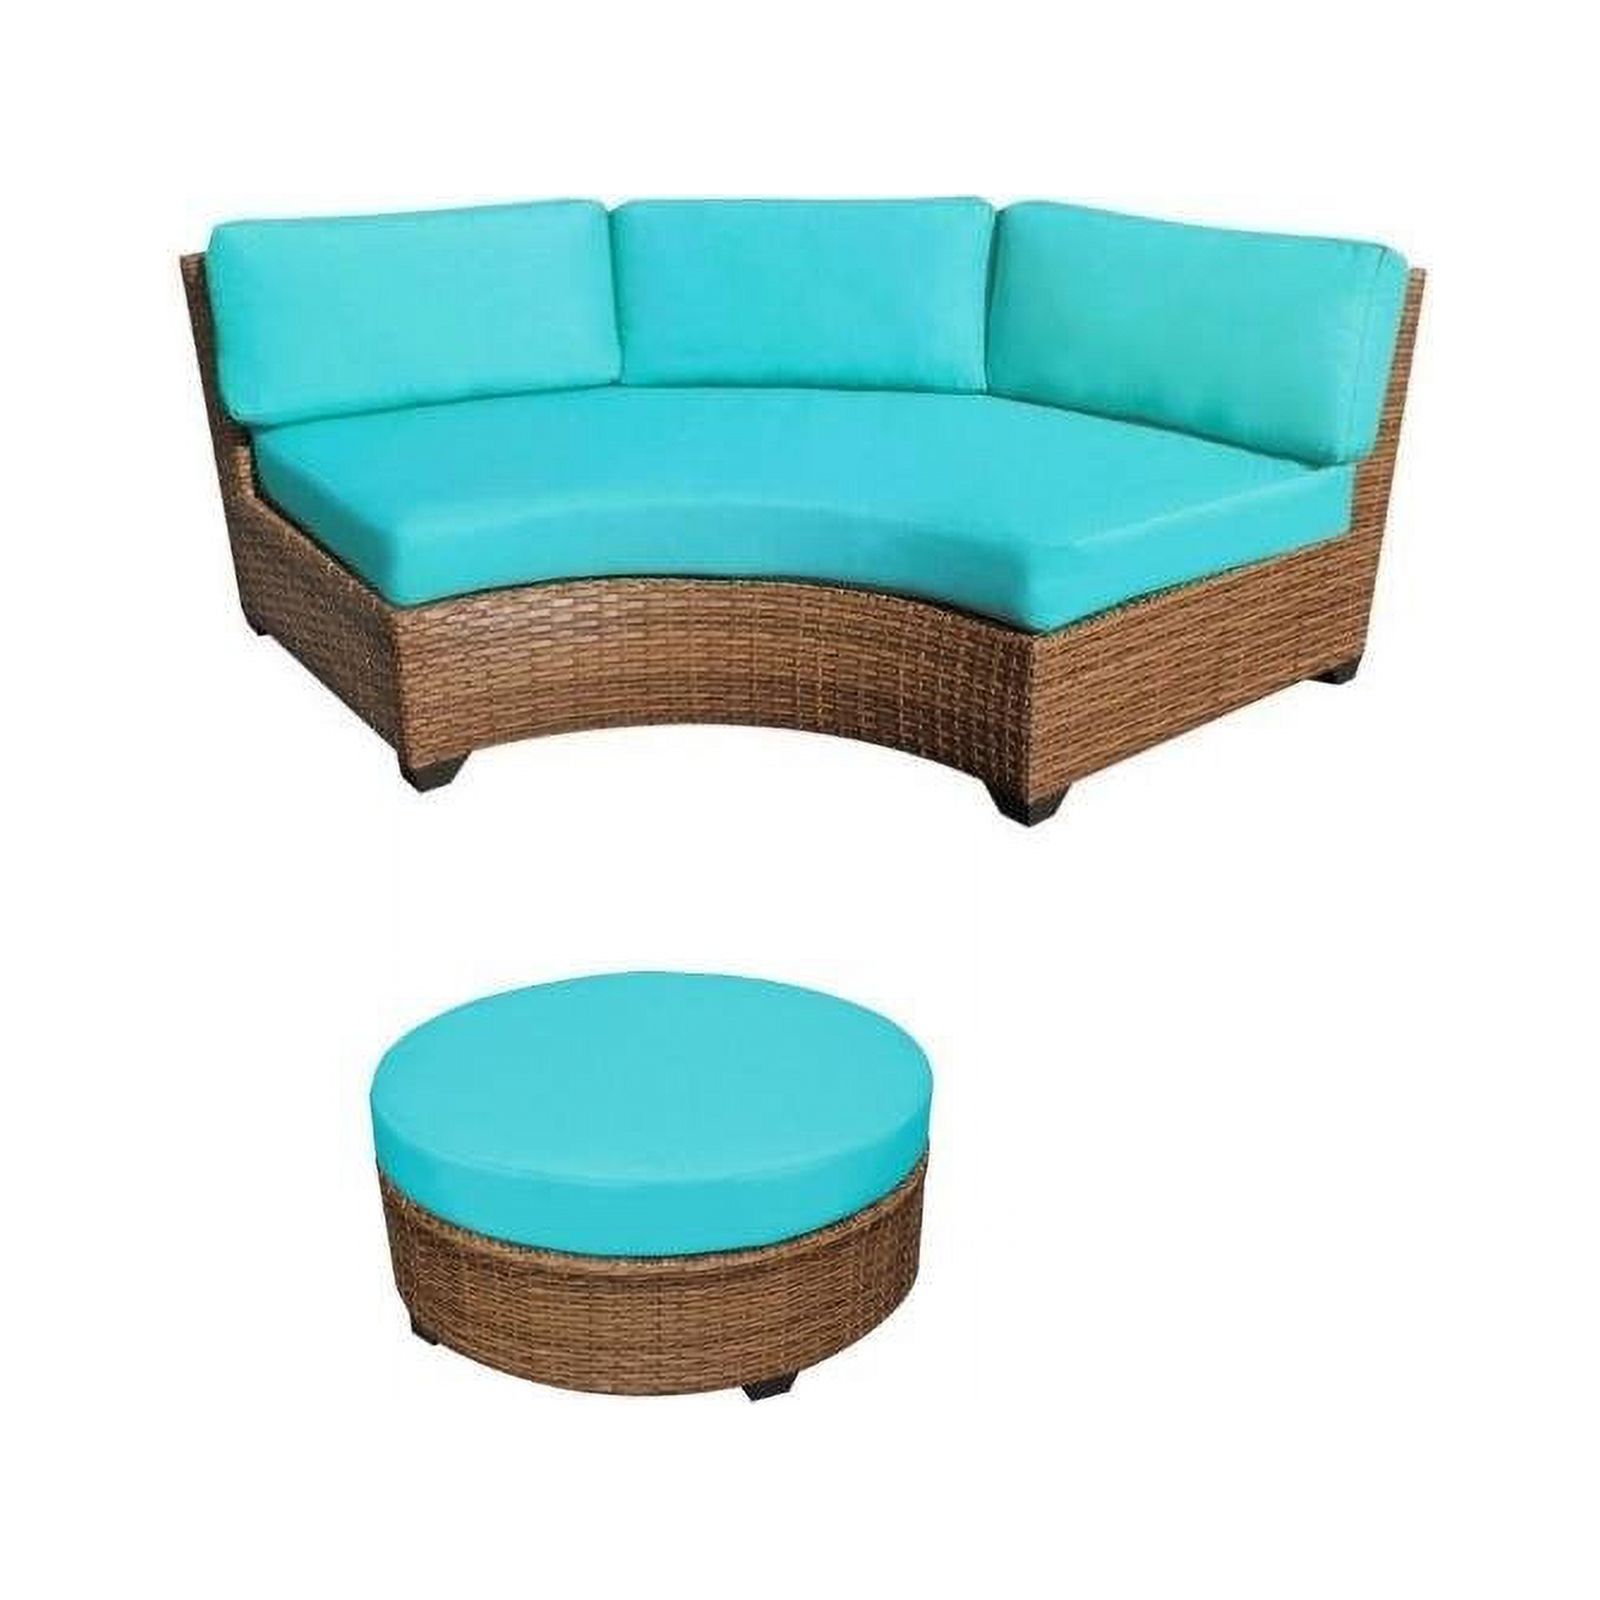 Set of 2 Outdoor Wicker Curved Sofa and Coffee Table in Aruba Blue - image 1 of 5